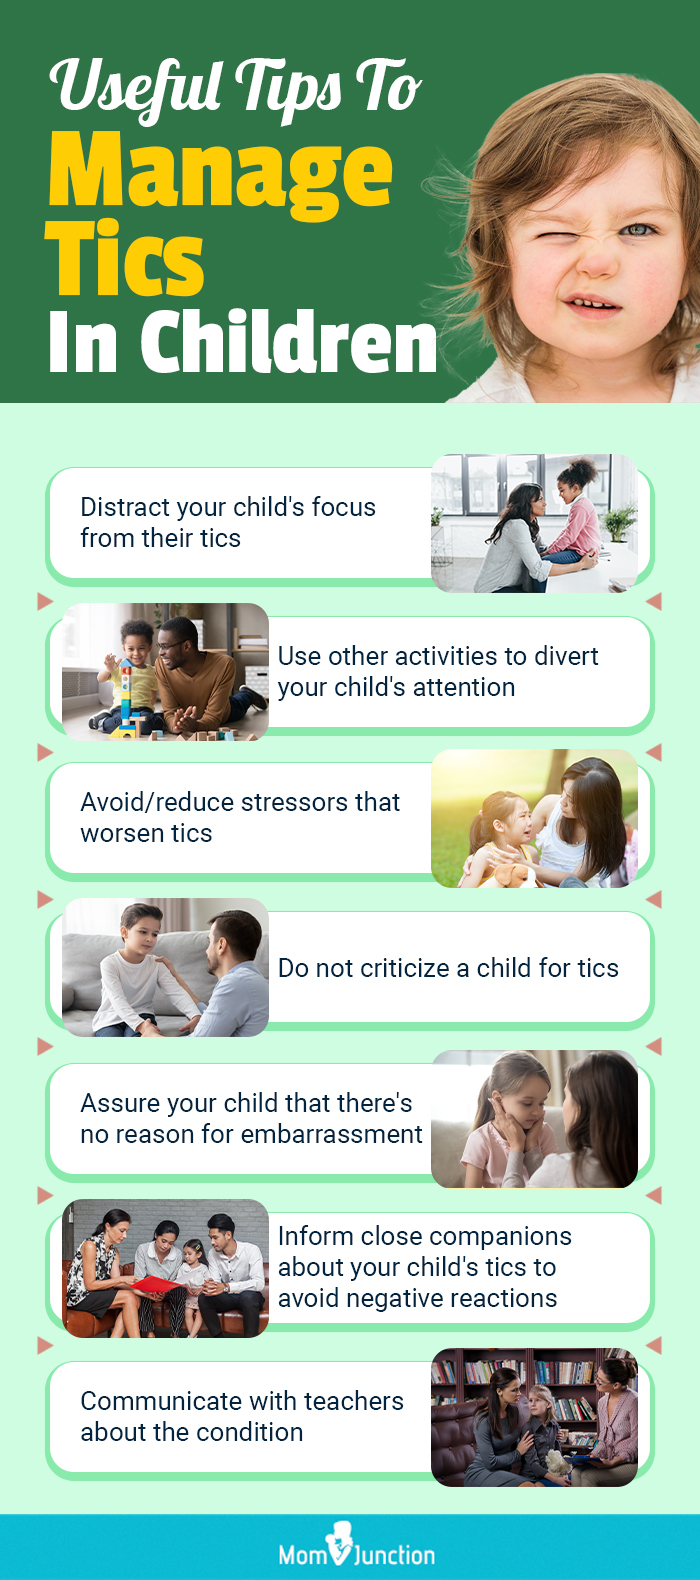 useful tips to manage tics in children(infographic) 